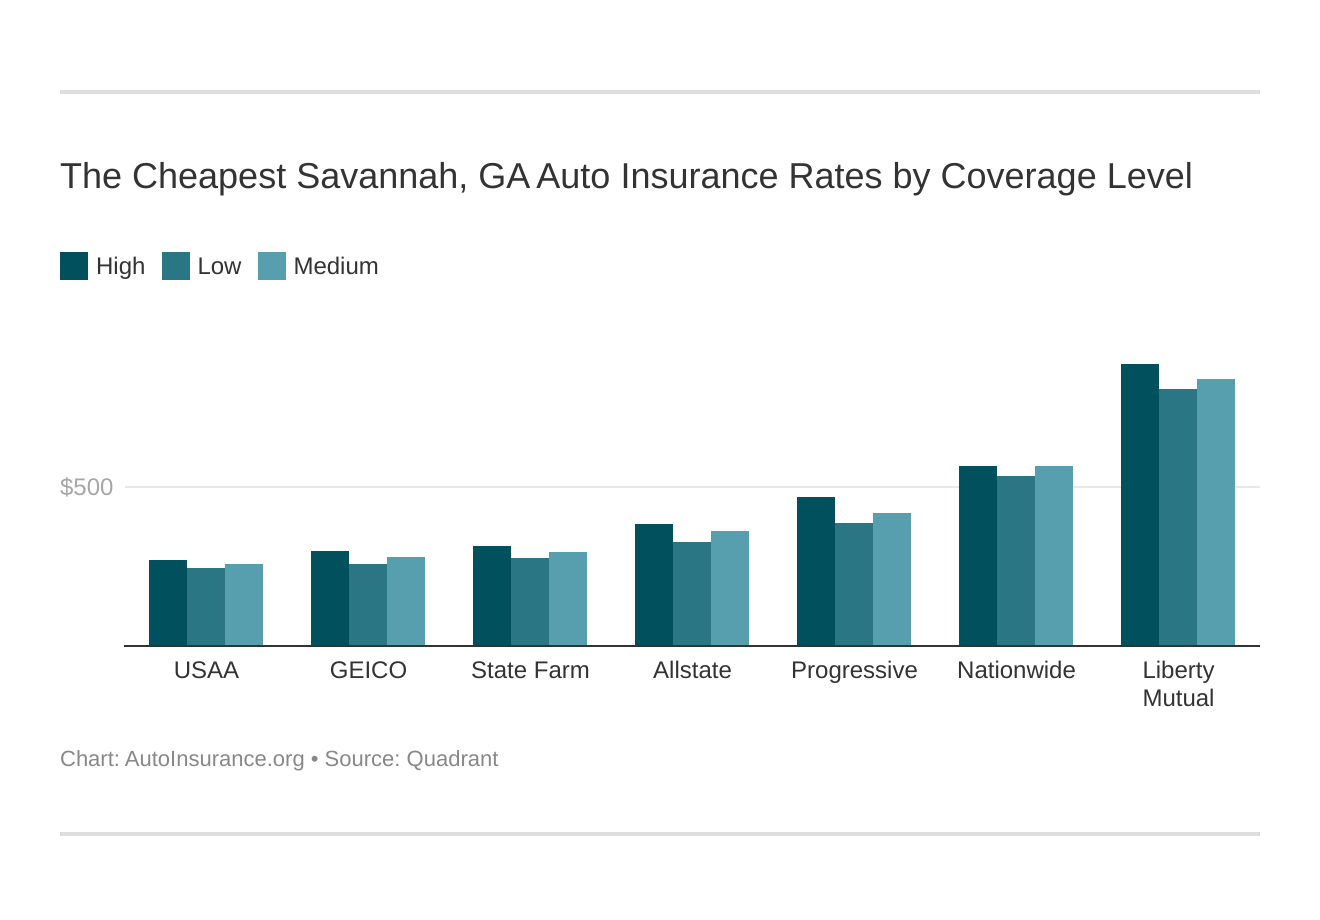 The Cheapest Savannah, GA Auto Insurance Rates by Coverage Level